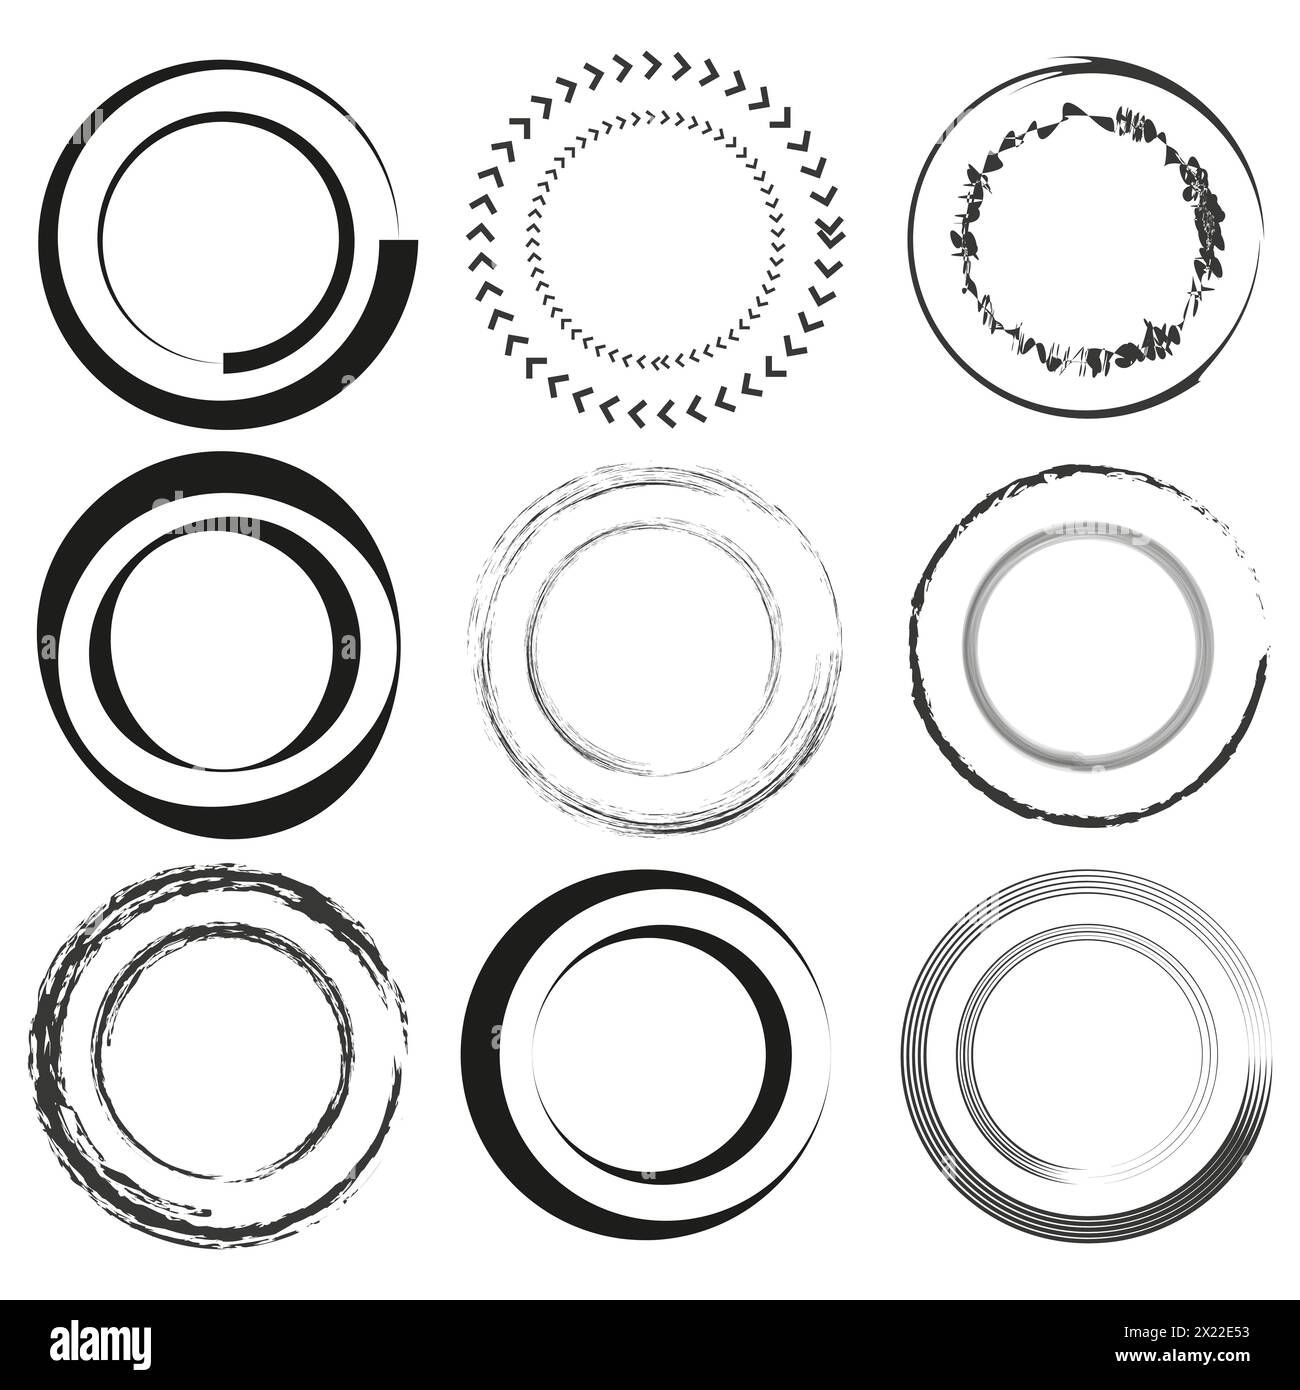 Assorted circular grunge frames. Set of abstract round borders. Decorative circle elements. Vector illustration. EPS 10. Stock Vector